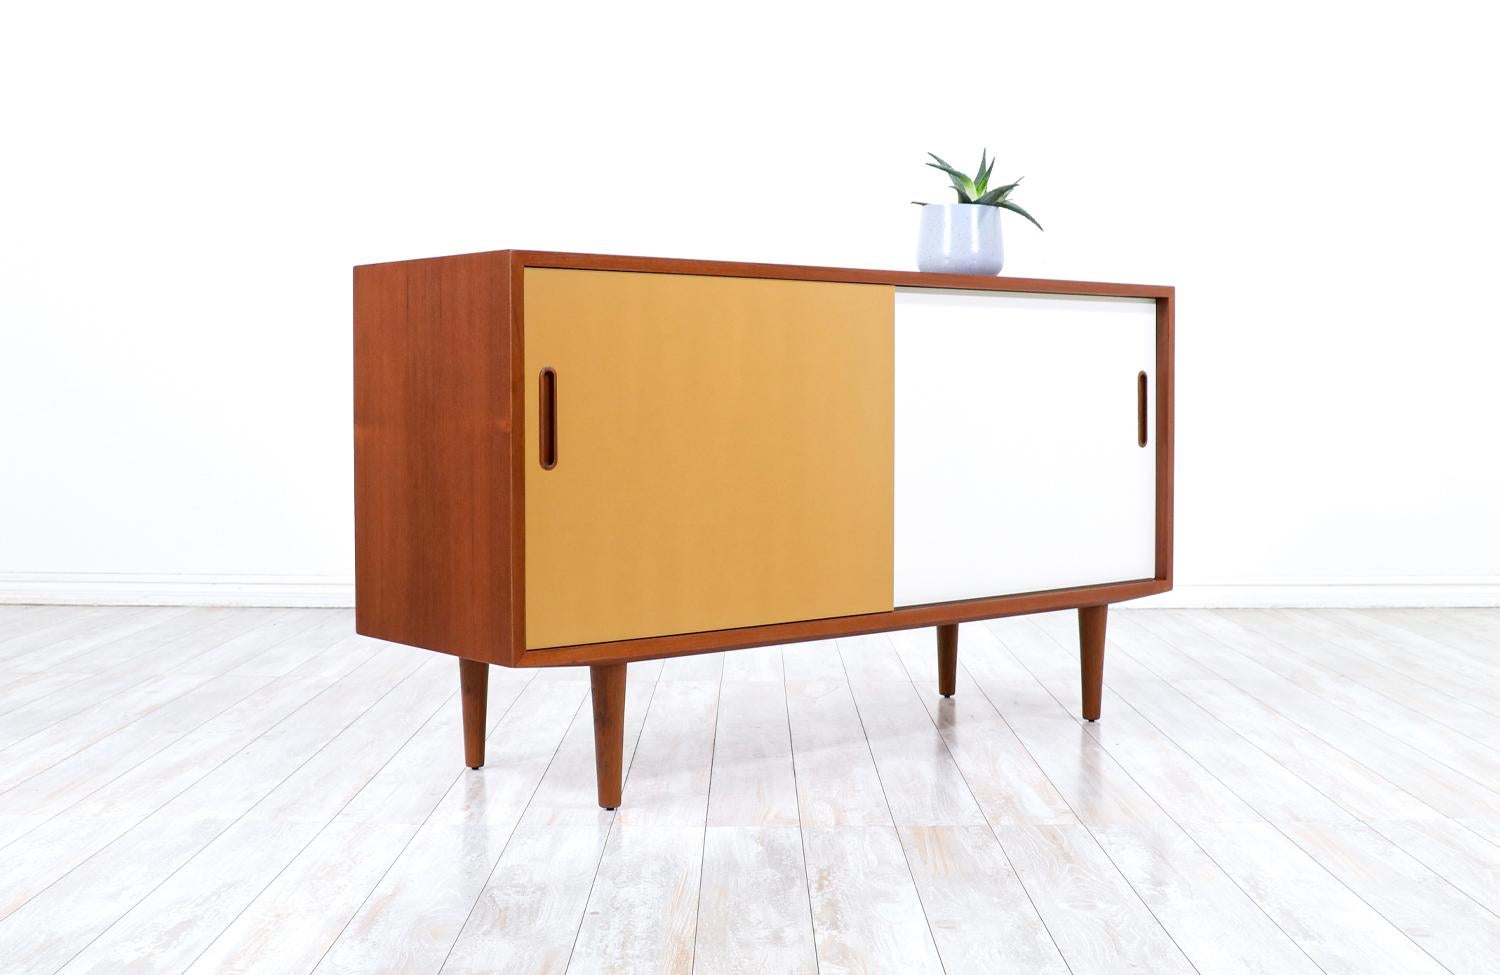 Mid-20th Century Danish Modern Two-Tone Lacquered & Teak Credenza by Carlo Jensen for Hundevad